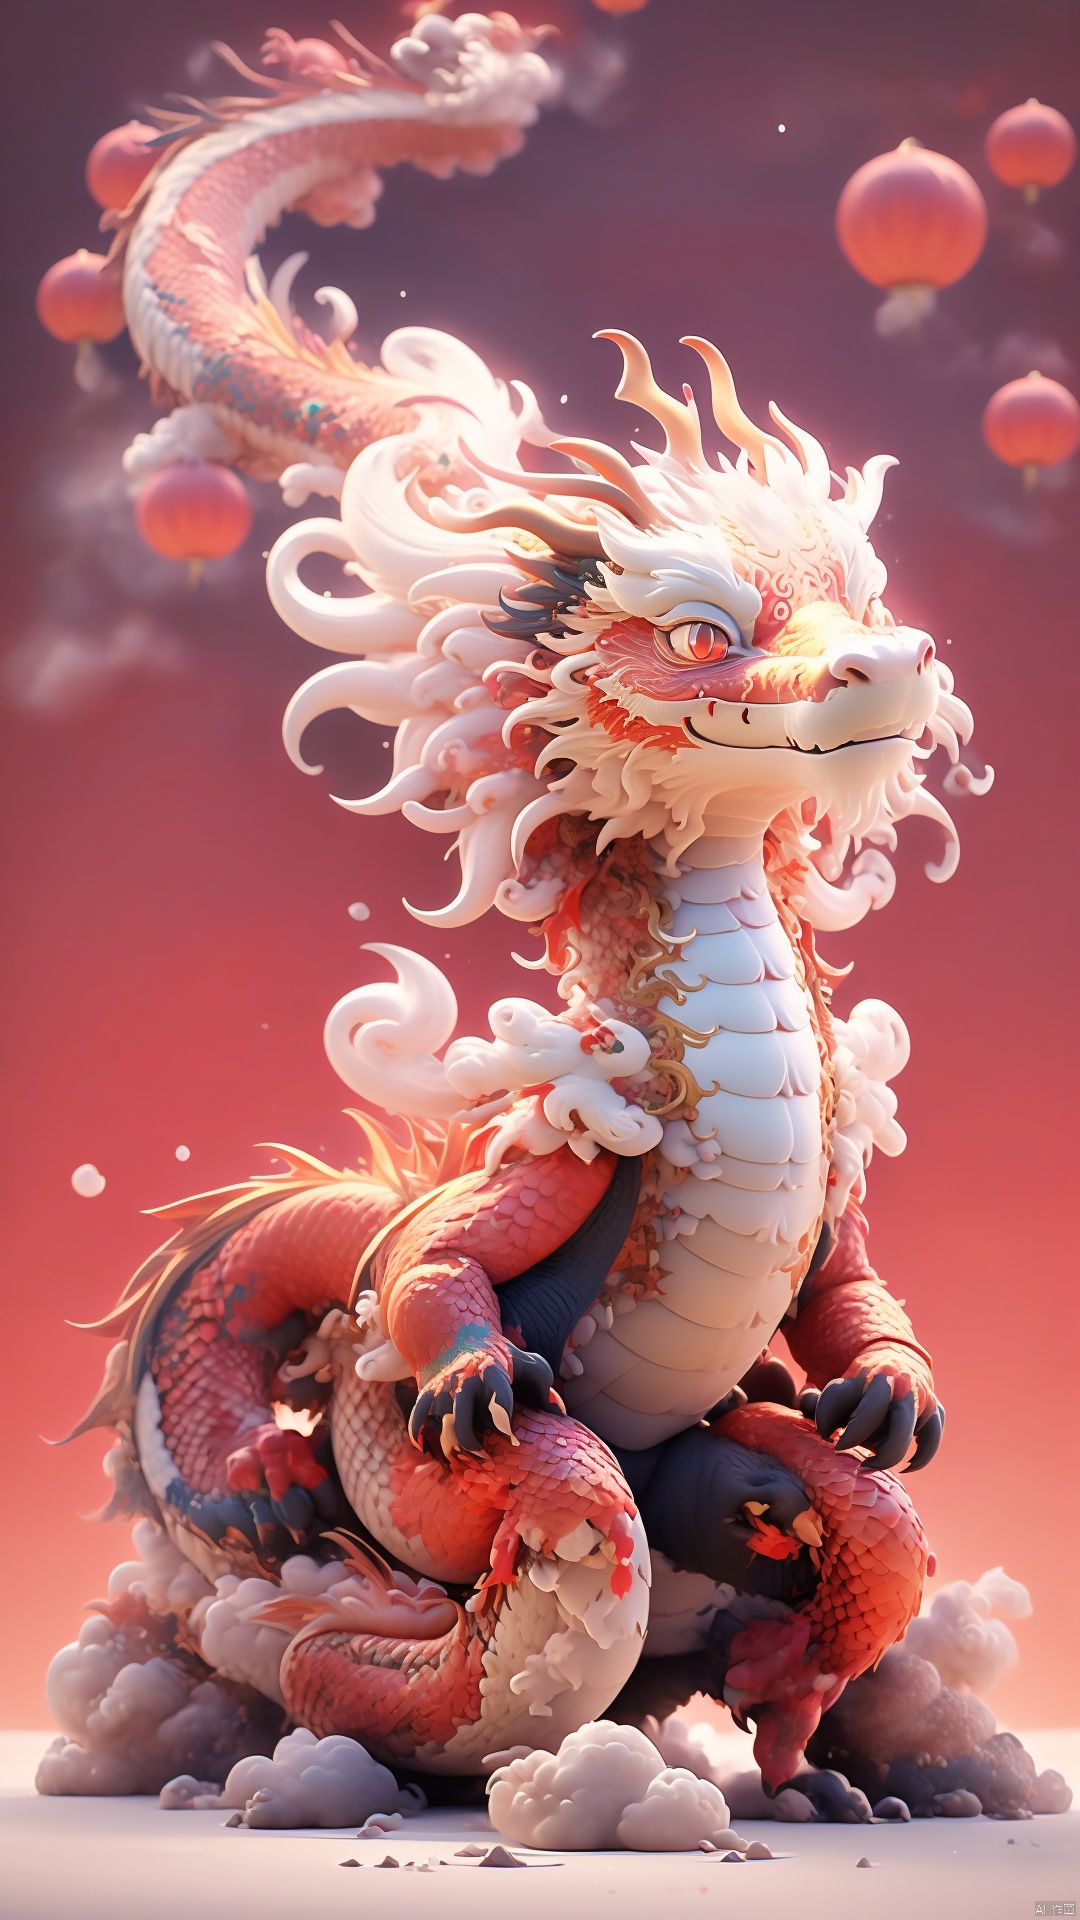  Masterpiece,best quality,4k,Chinese New Year,red background,festive atmosphere,dragon illustration,detailed character design,
CGSociety,3D 8K HD Trend on ArtStation,China Dragon Dou,Gold foil painting,,,
, HTTP